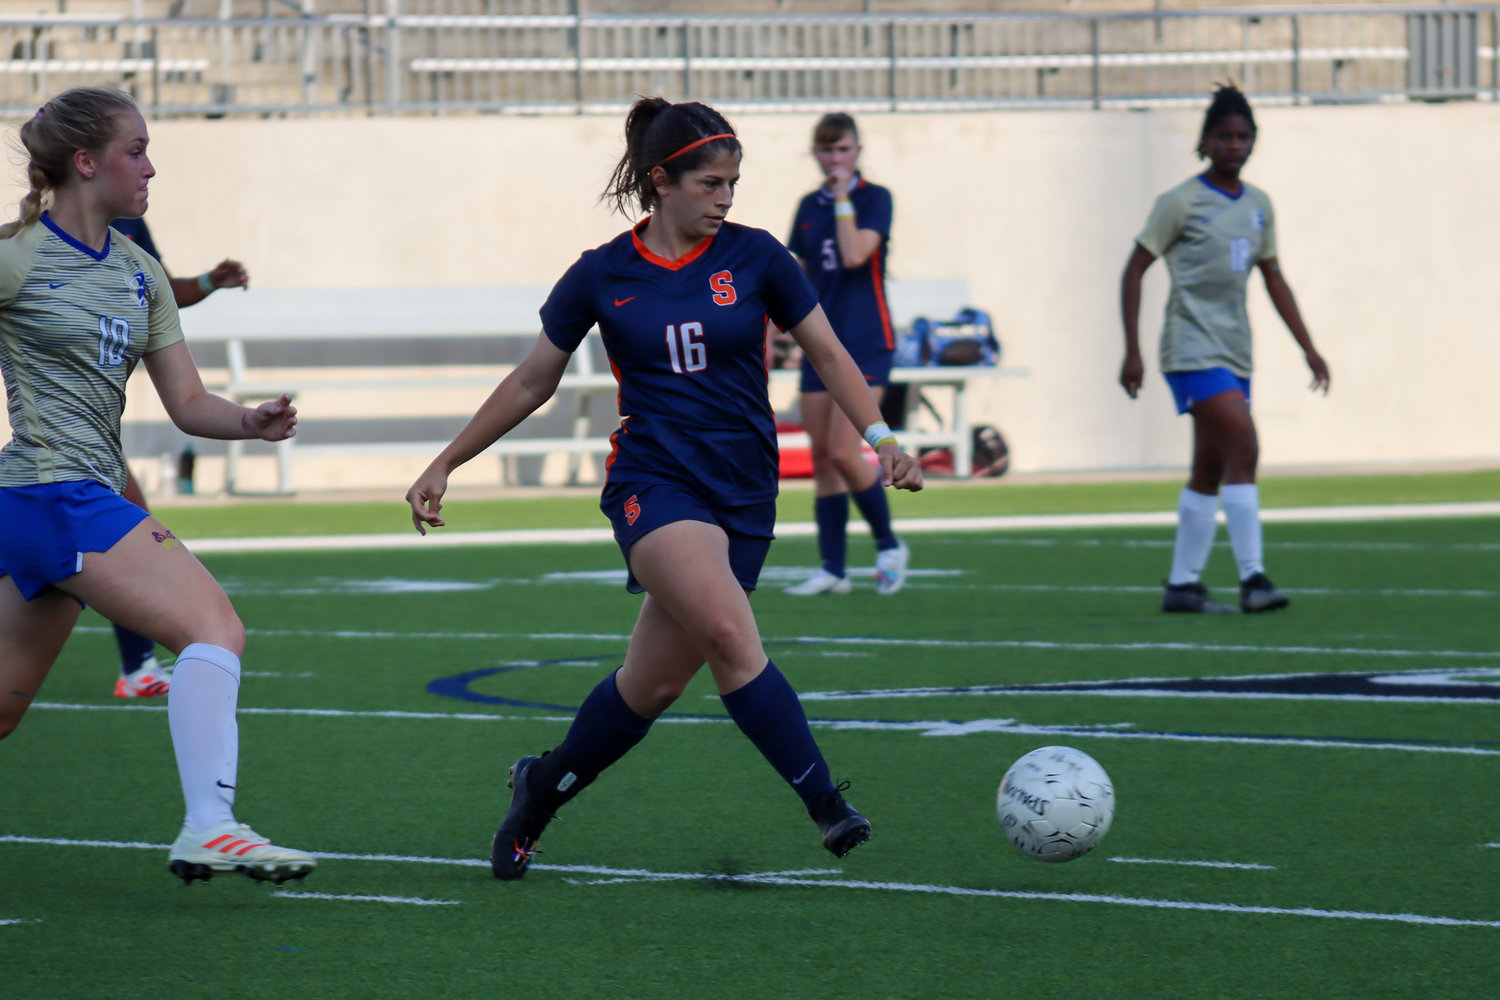 Seven Lakes senior midfielder Megan Vigil controls possession during the Spartans’ 7-0 Class 6A bi-district playoff win on Friday, March 26, at Legacy Stadium.